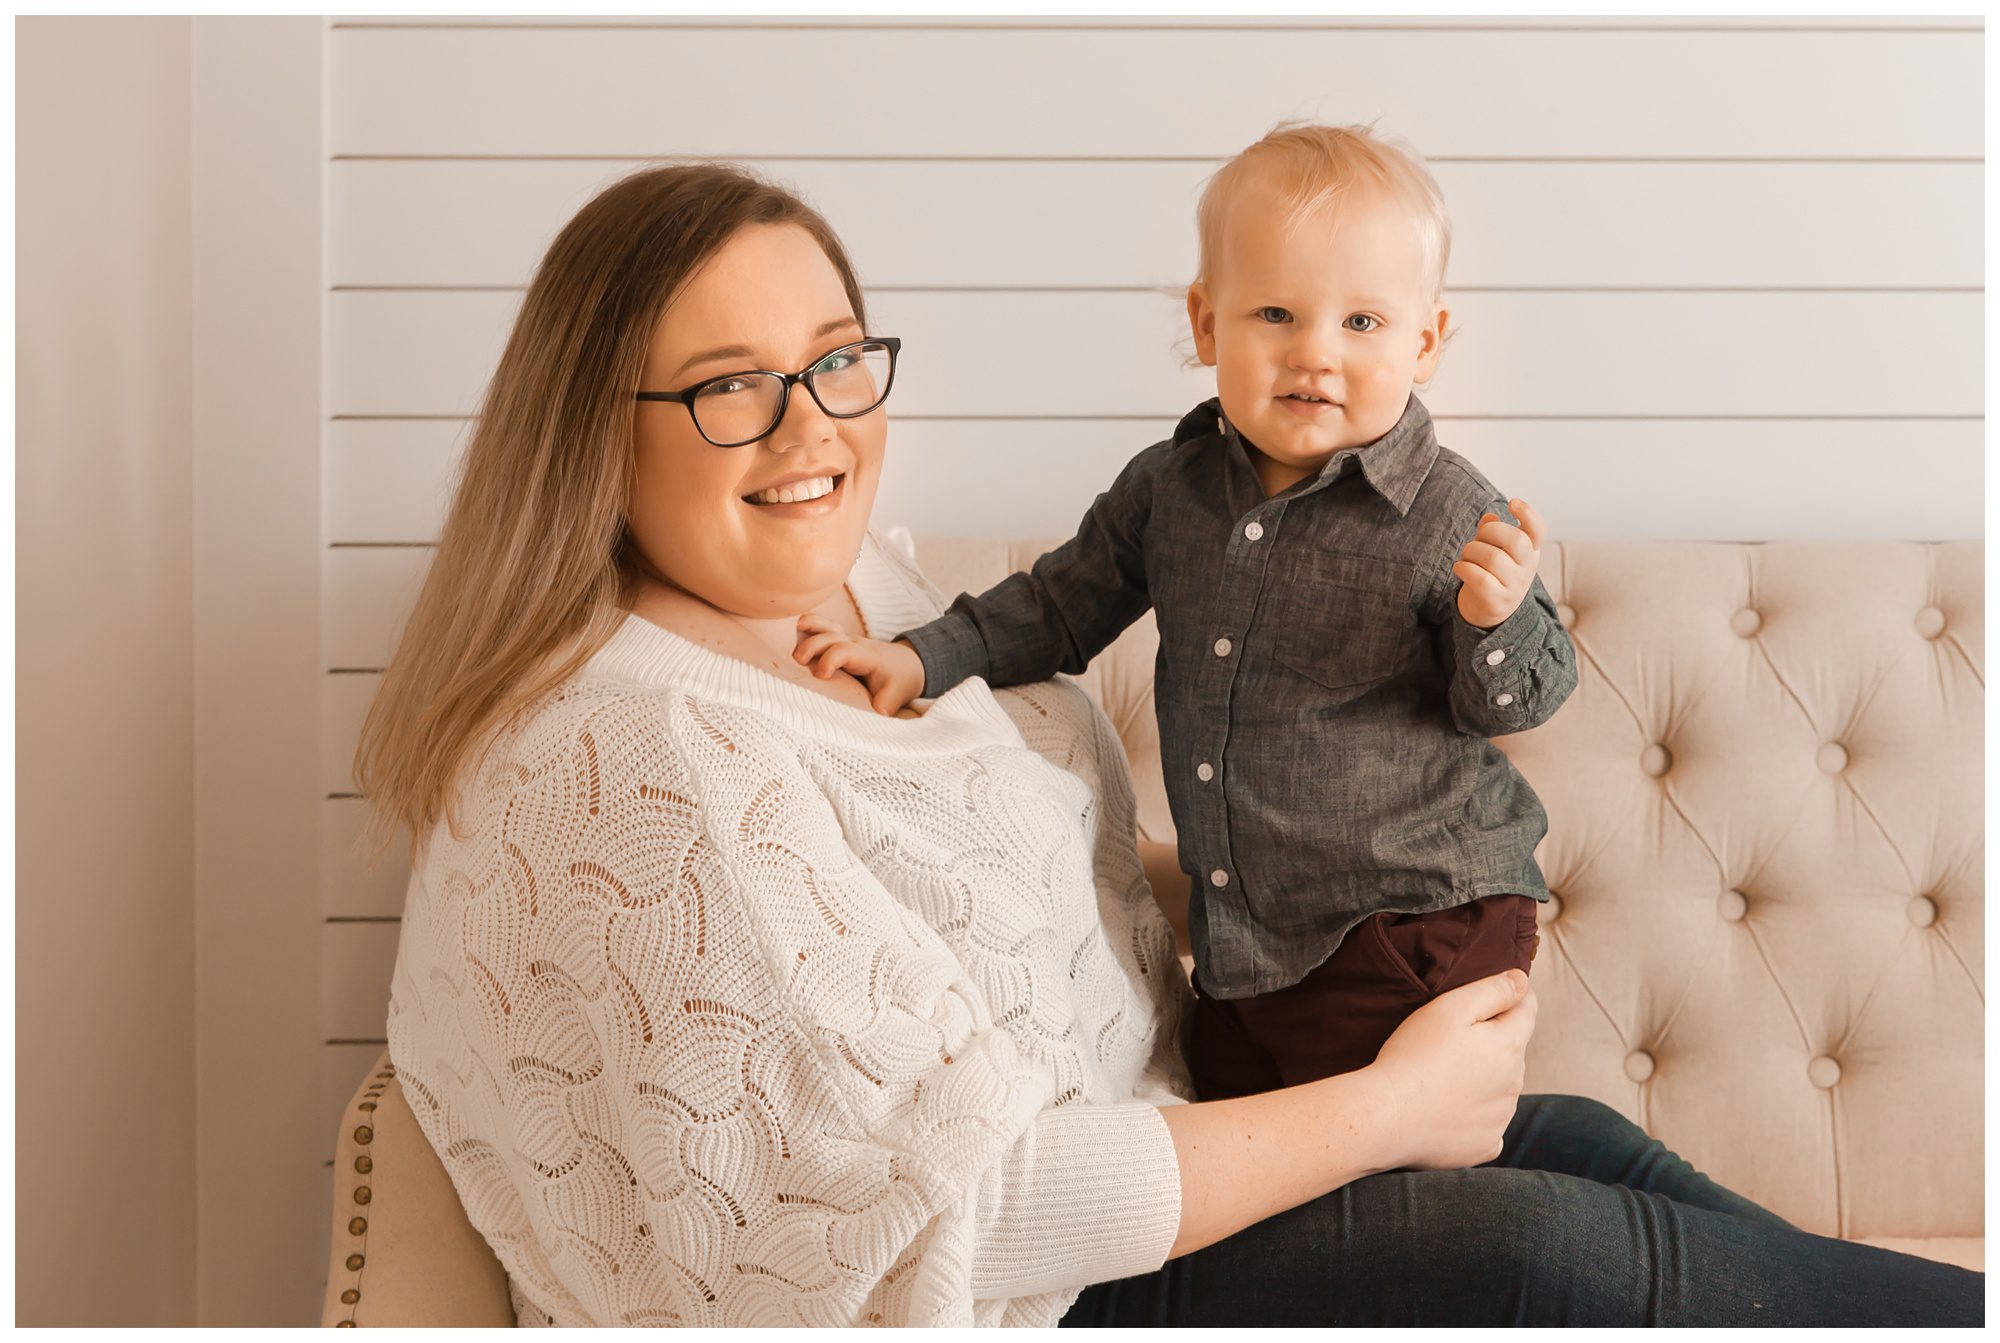 Mini Session, Nashville Mini Session, Murfreesboro Mini Session, Boutique Mini Session, Boutique Pop Up, Pop Up Photography, Pop Up Event, Mommy and Me, Mother and Son Photography